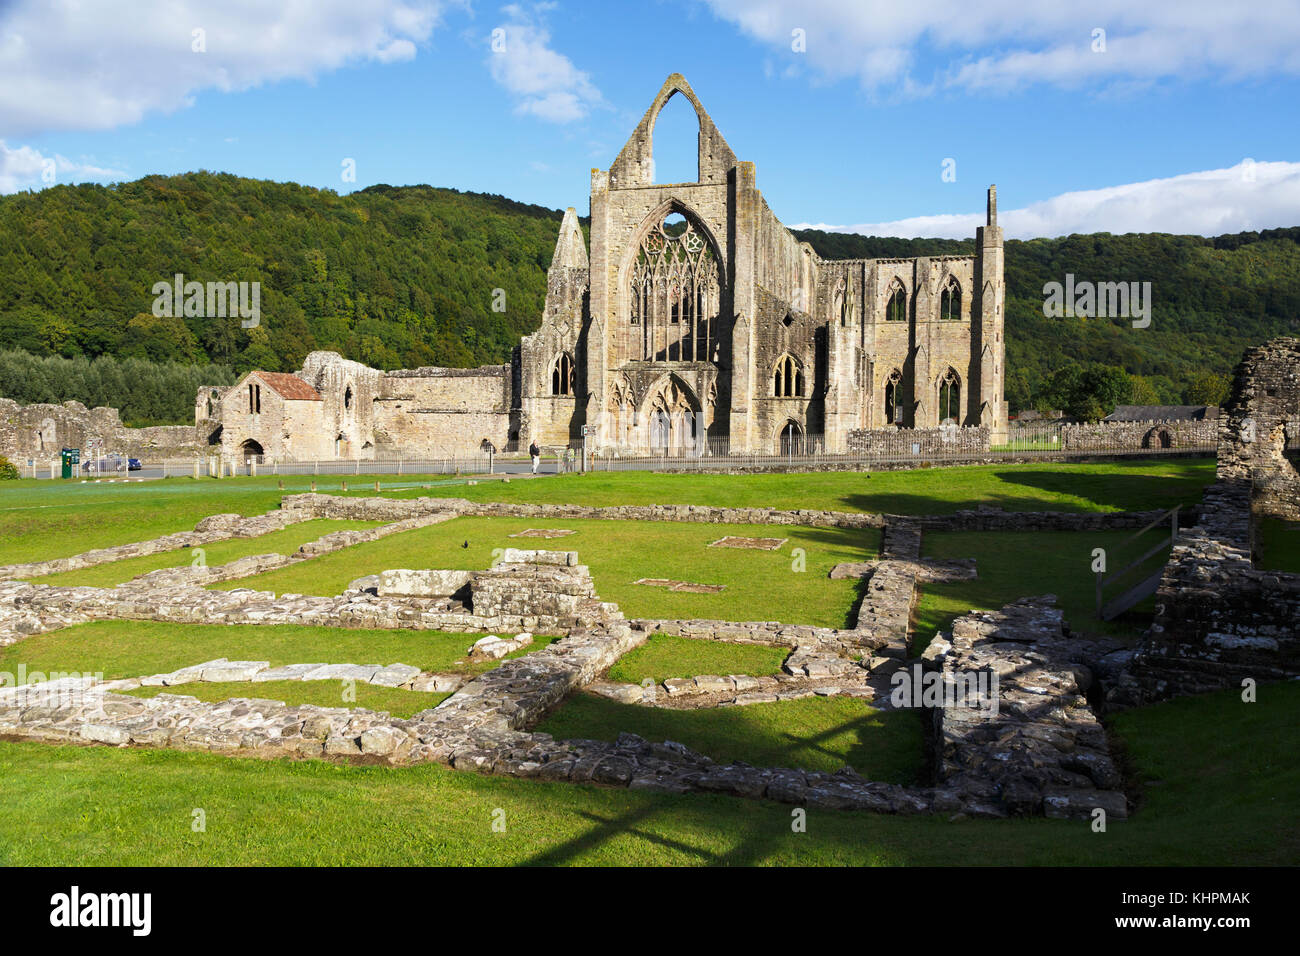 Tintern Abbey, Monmouthshire, Wales, United Kingdom.  The abbey was founded in 1131. Stock Photo